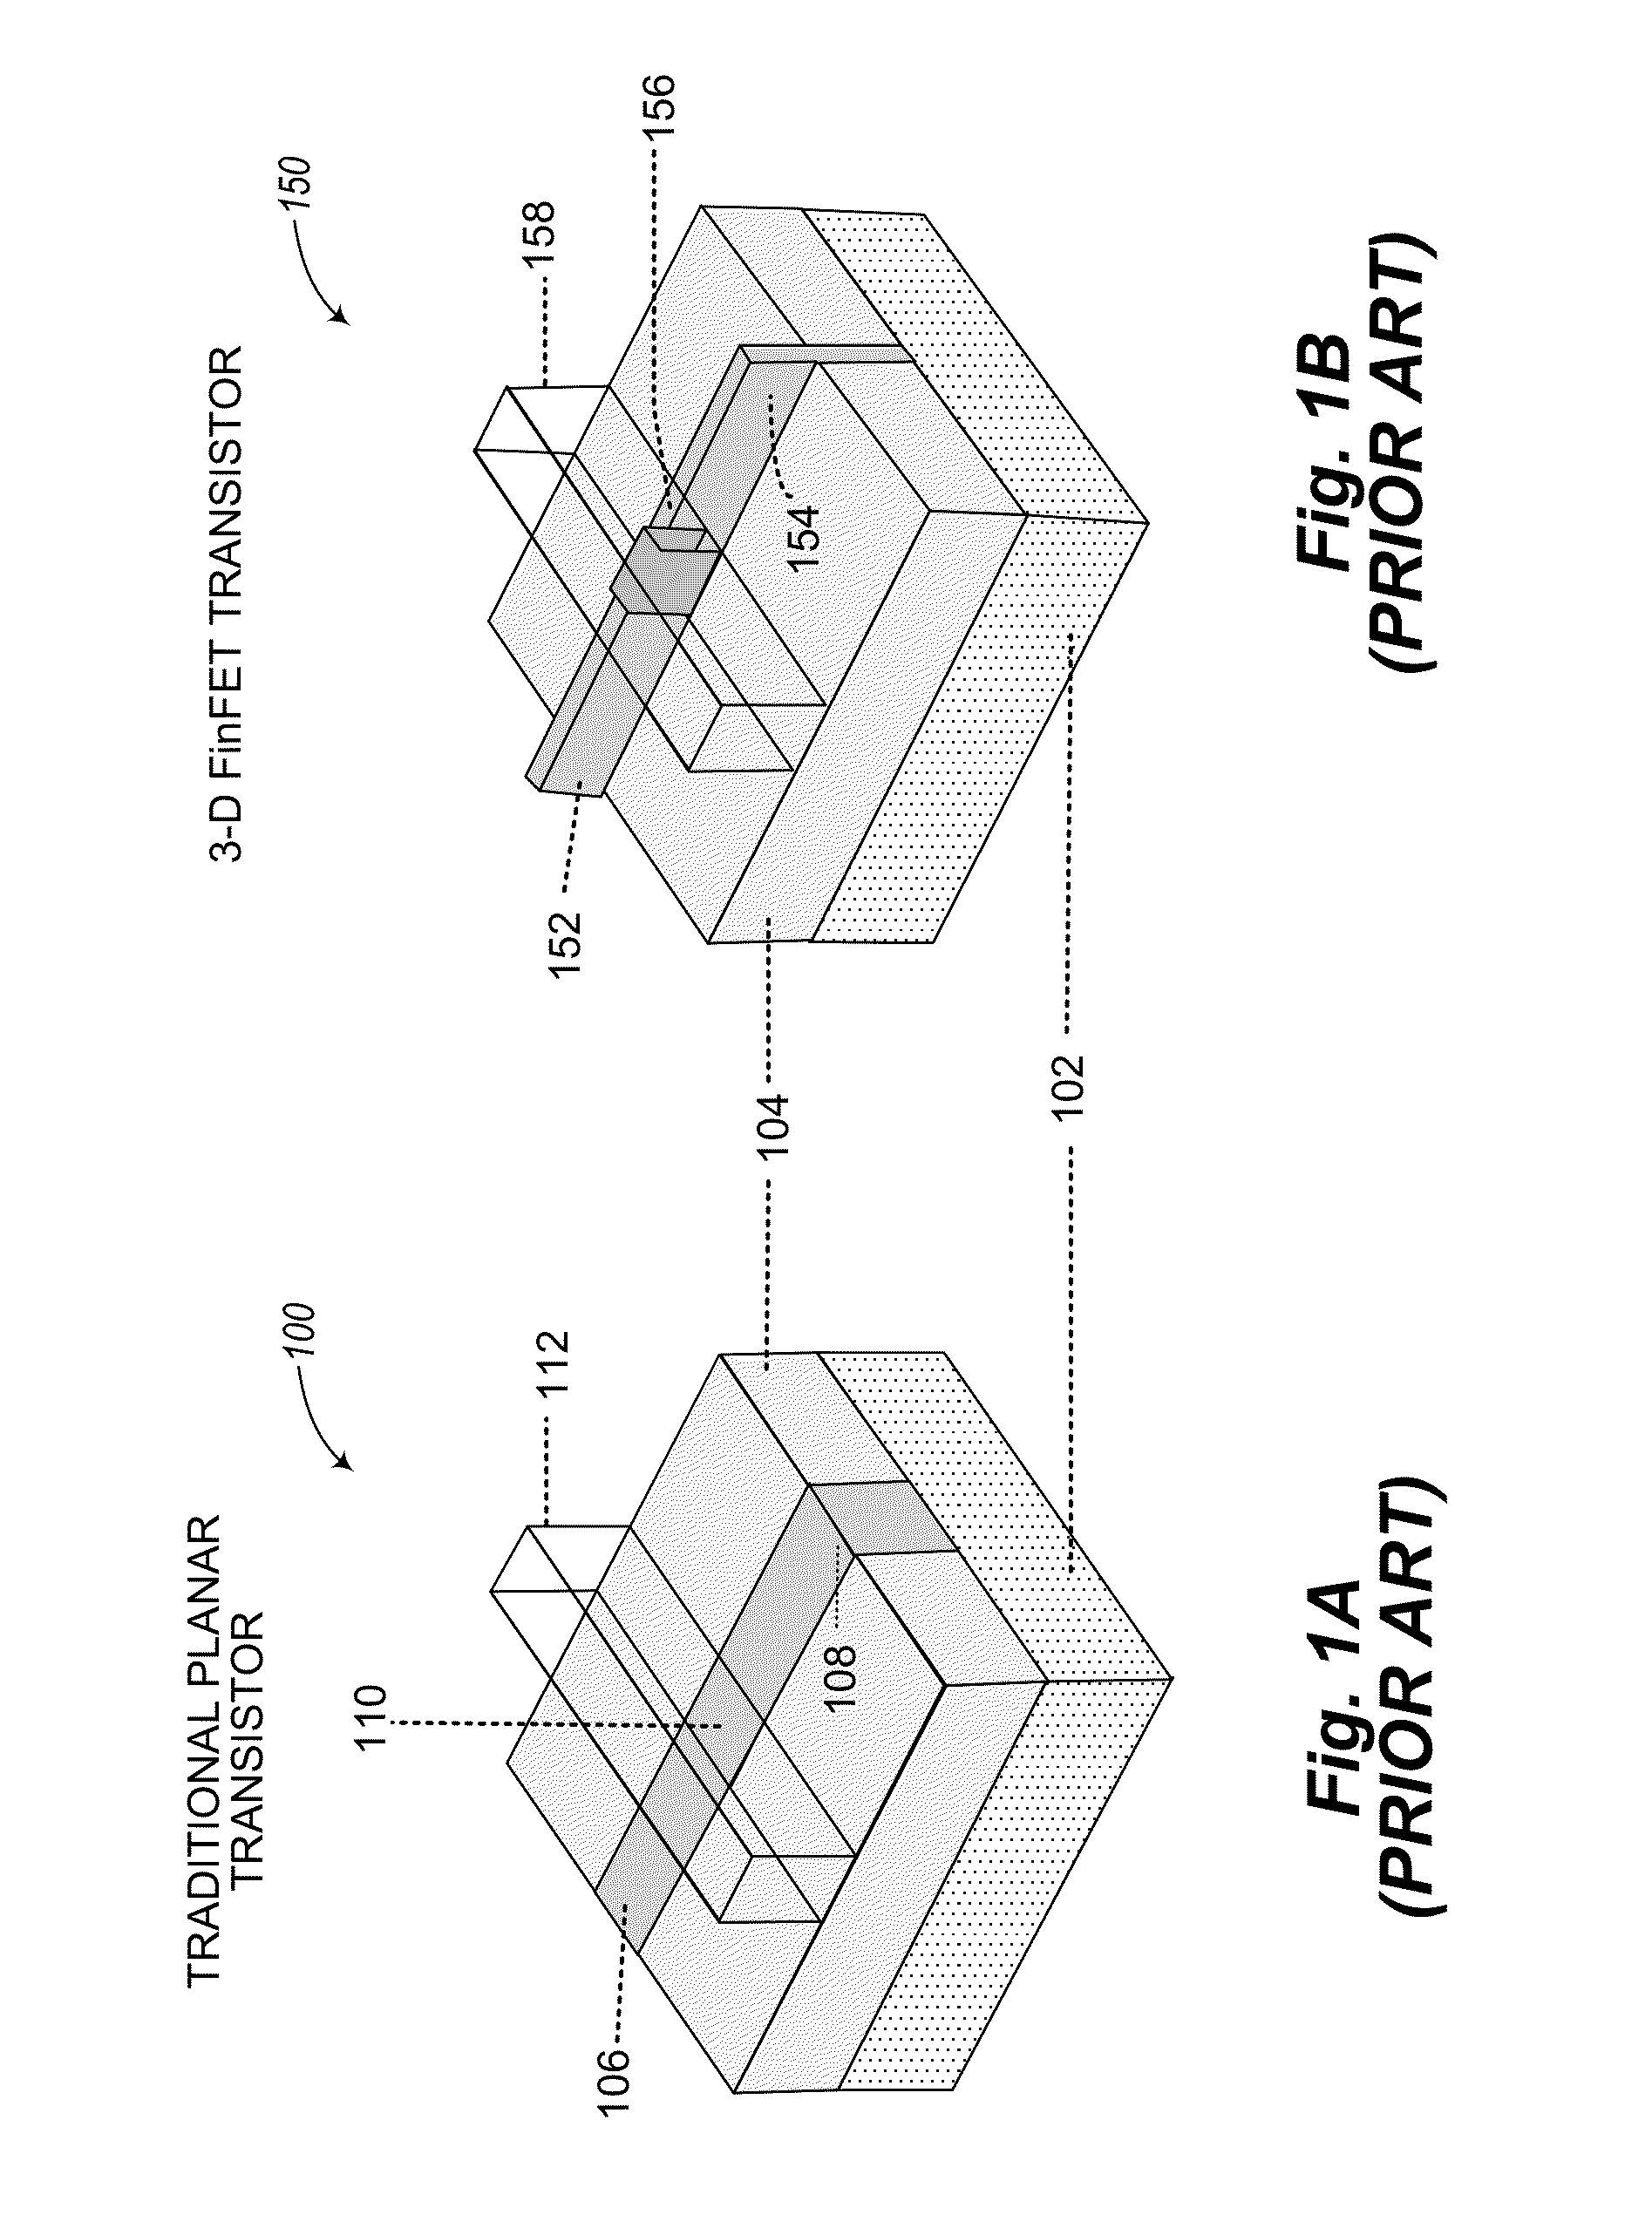 Fully substrate-isolated finfet transistor